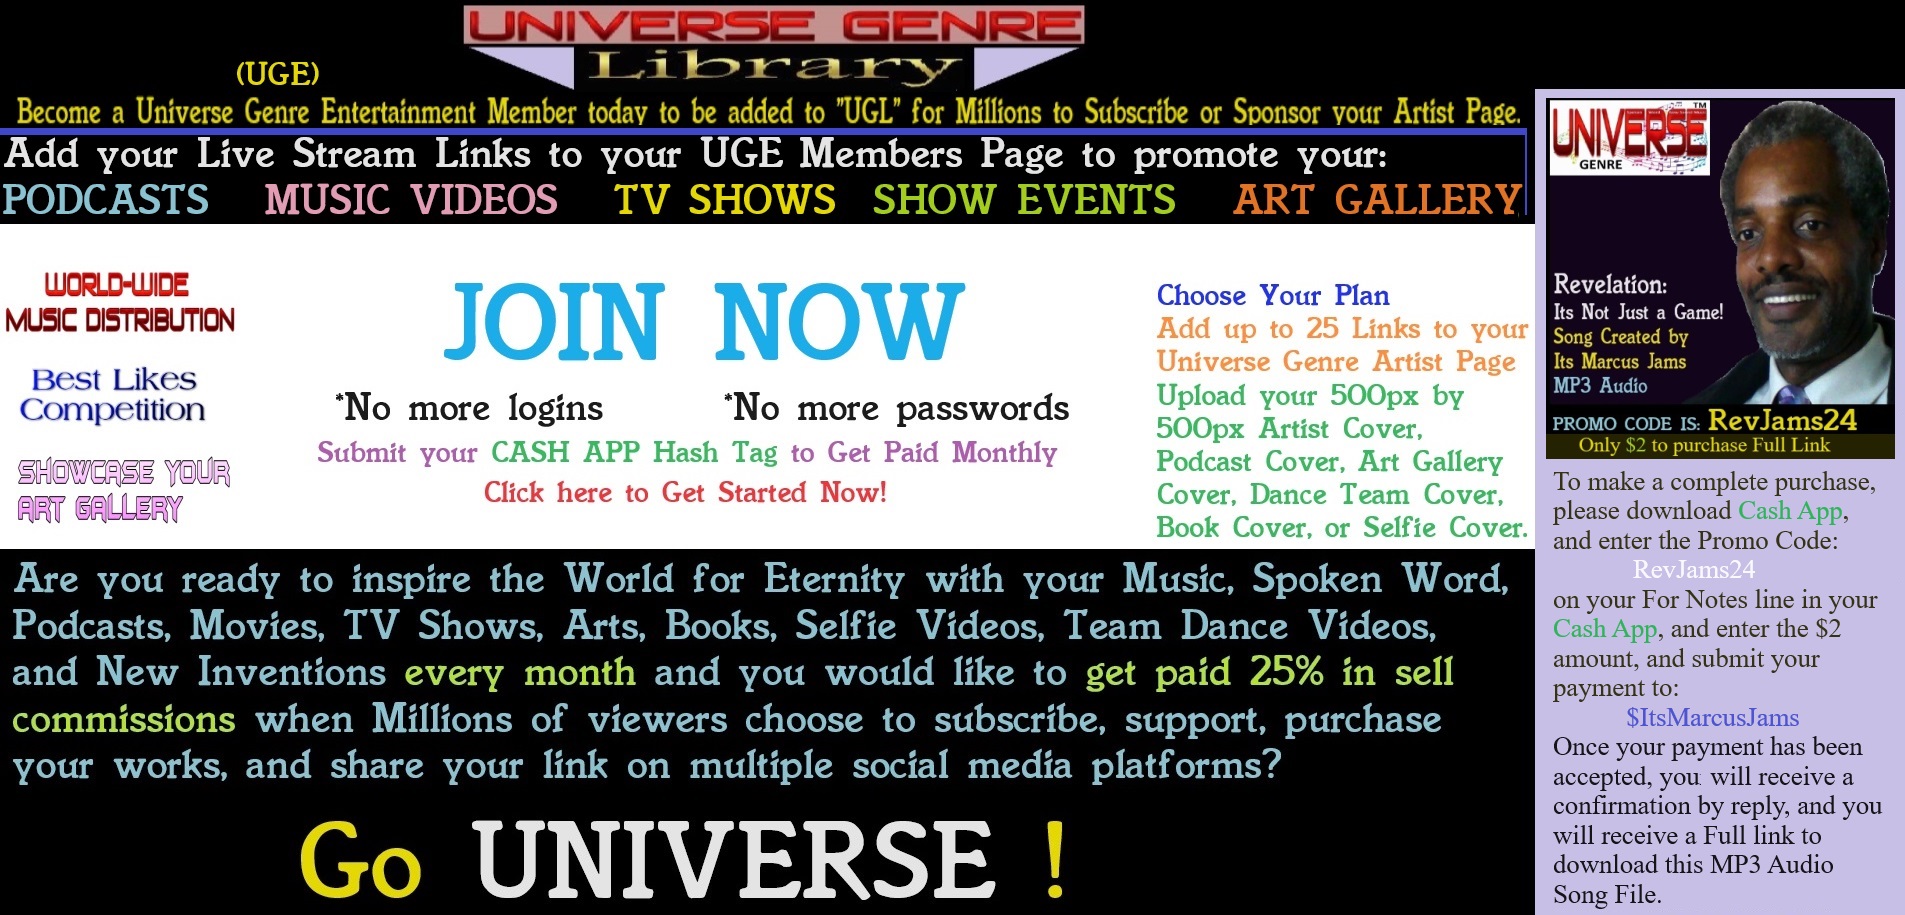 Go Universe, Join Today, your WORLDWIDE Music Distribution to earn you 25 percent royalty payouts every month